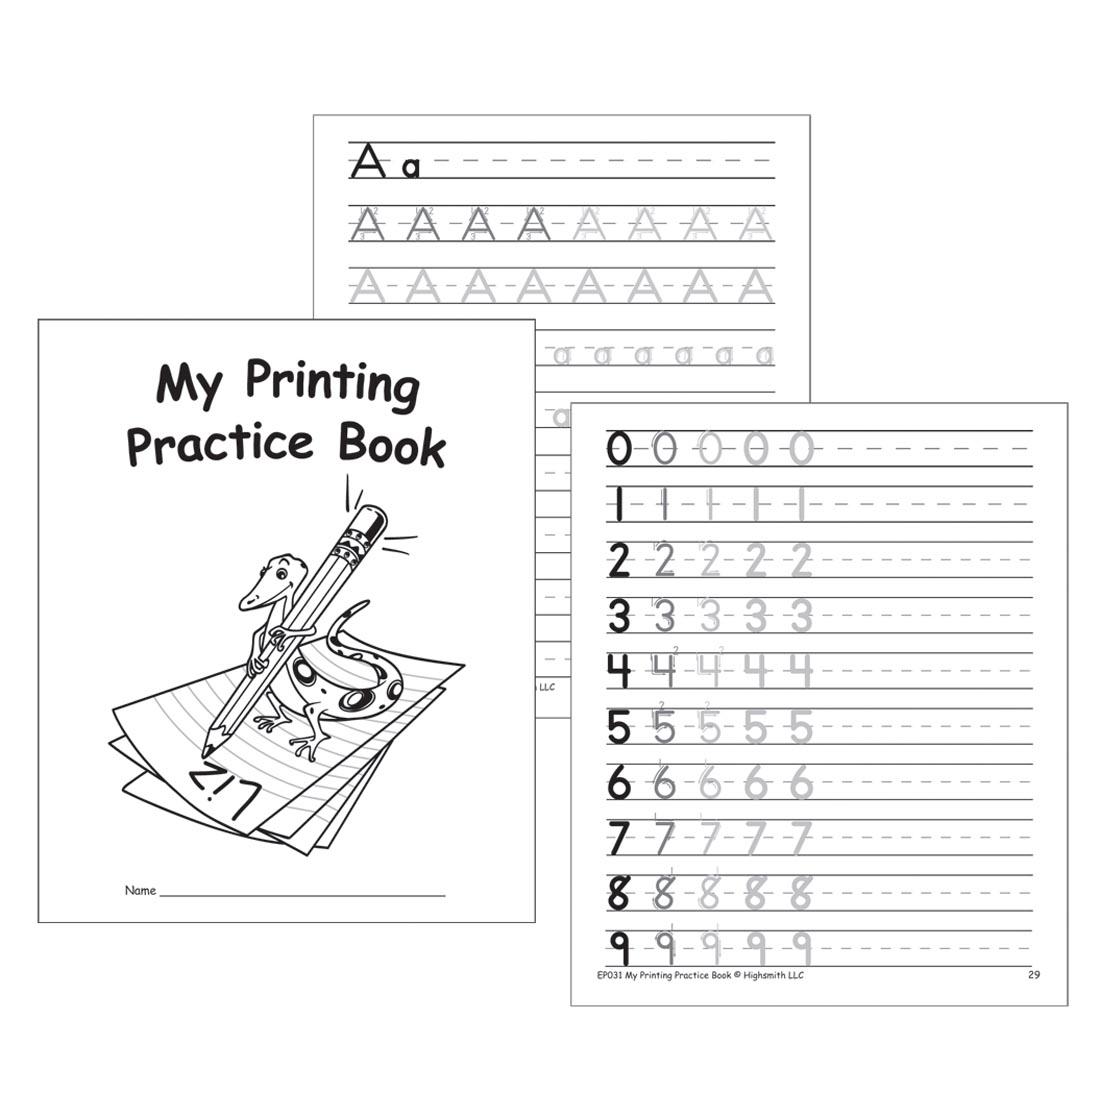 My Printing Practice Book with sample pages of the letter A and of numbers